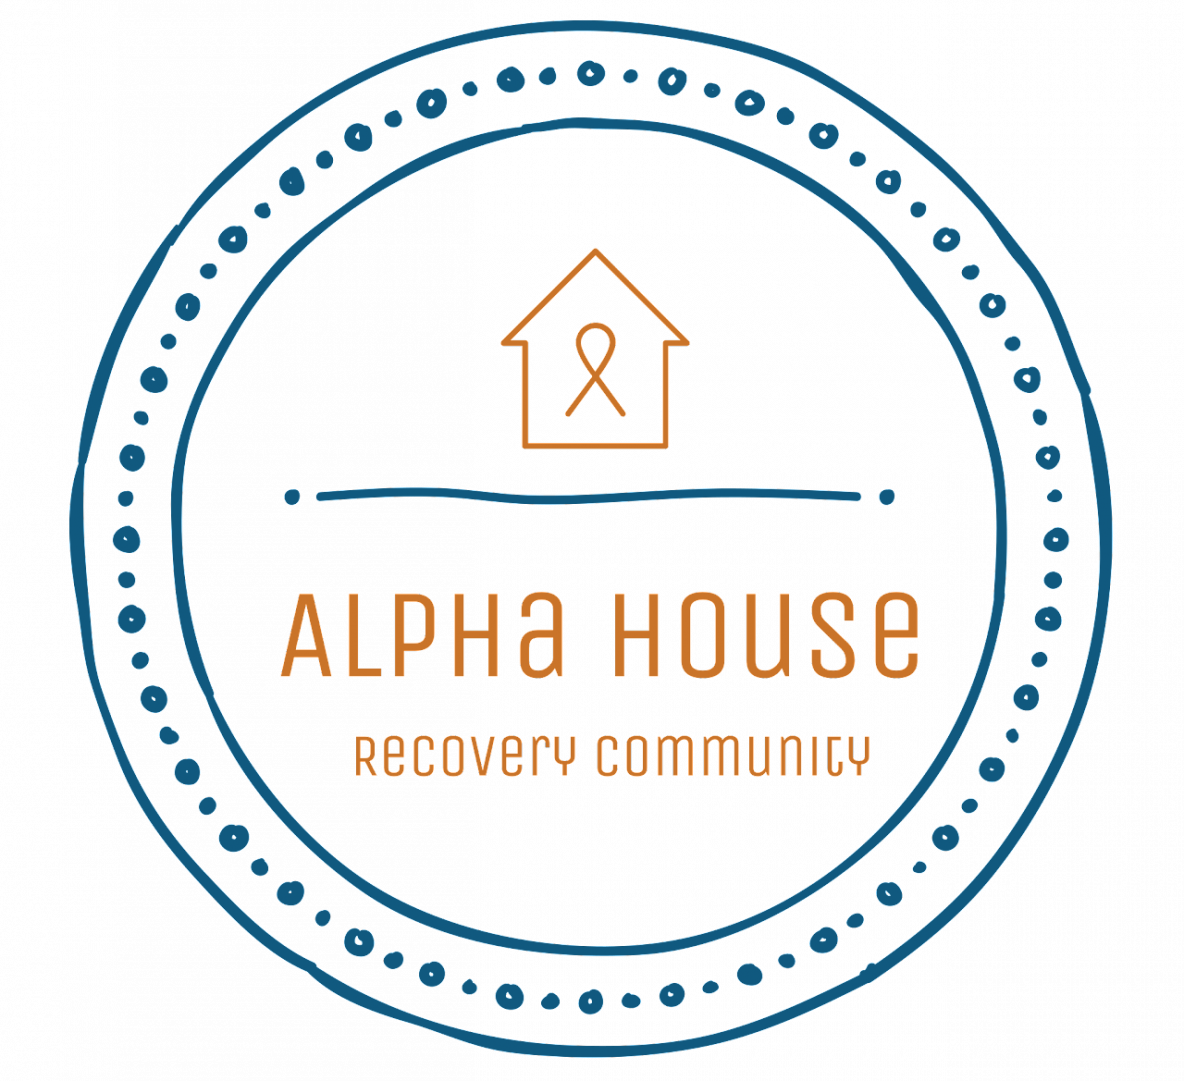 Alpha House Recovery Community